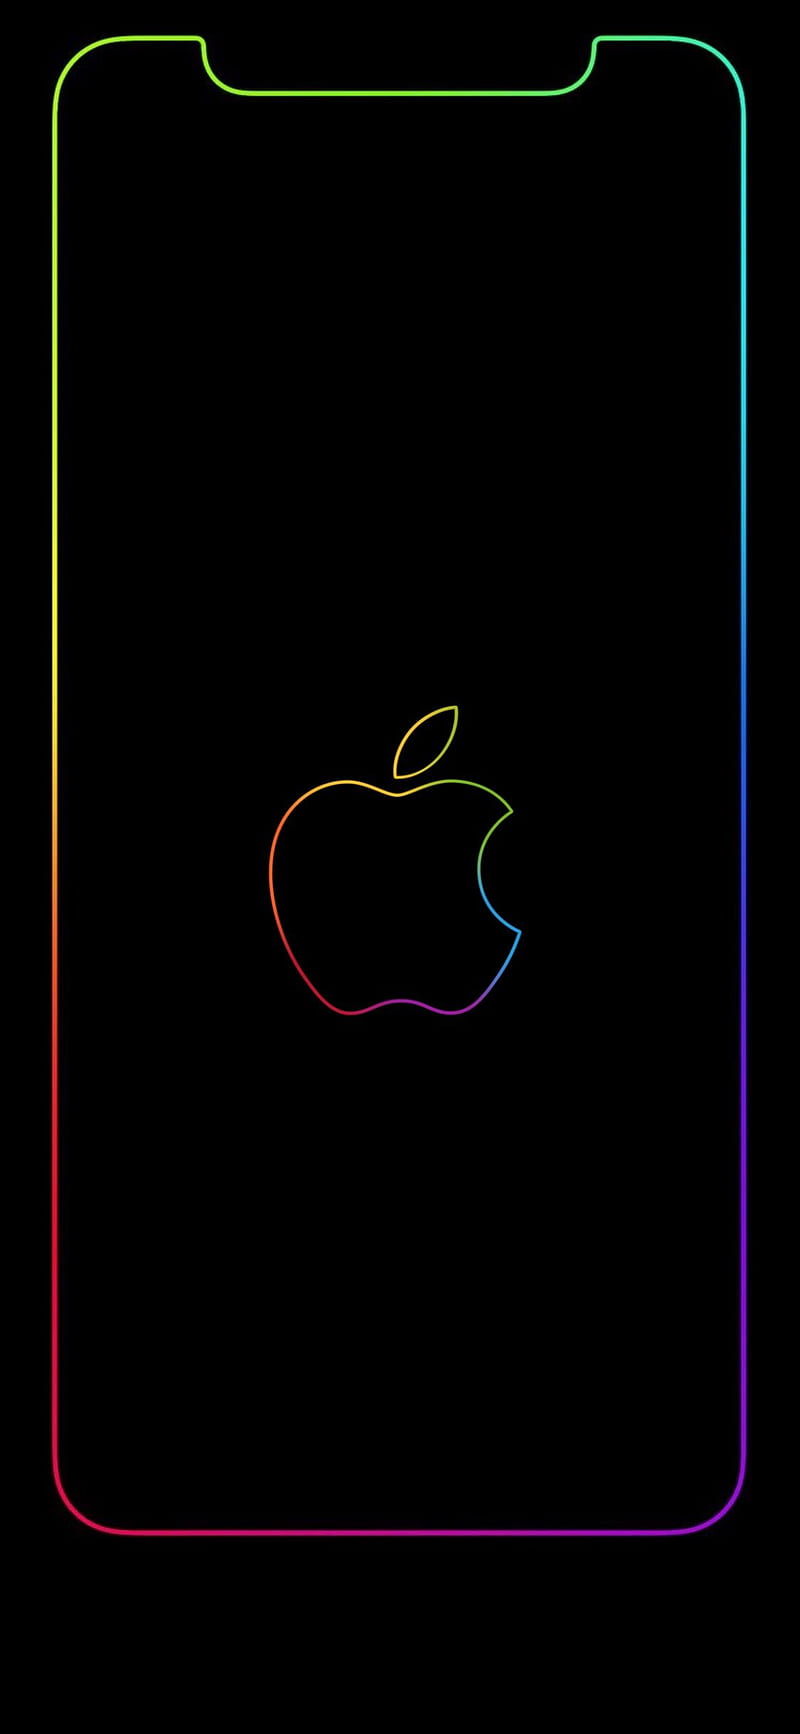 Free Iphone X Wallpaper Downloads 200 Iphone X Wallpapers for FREE   Wallpaperscom